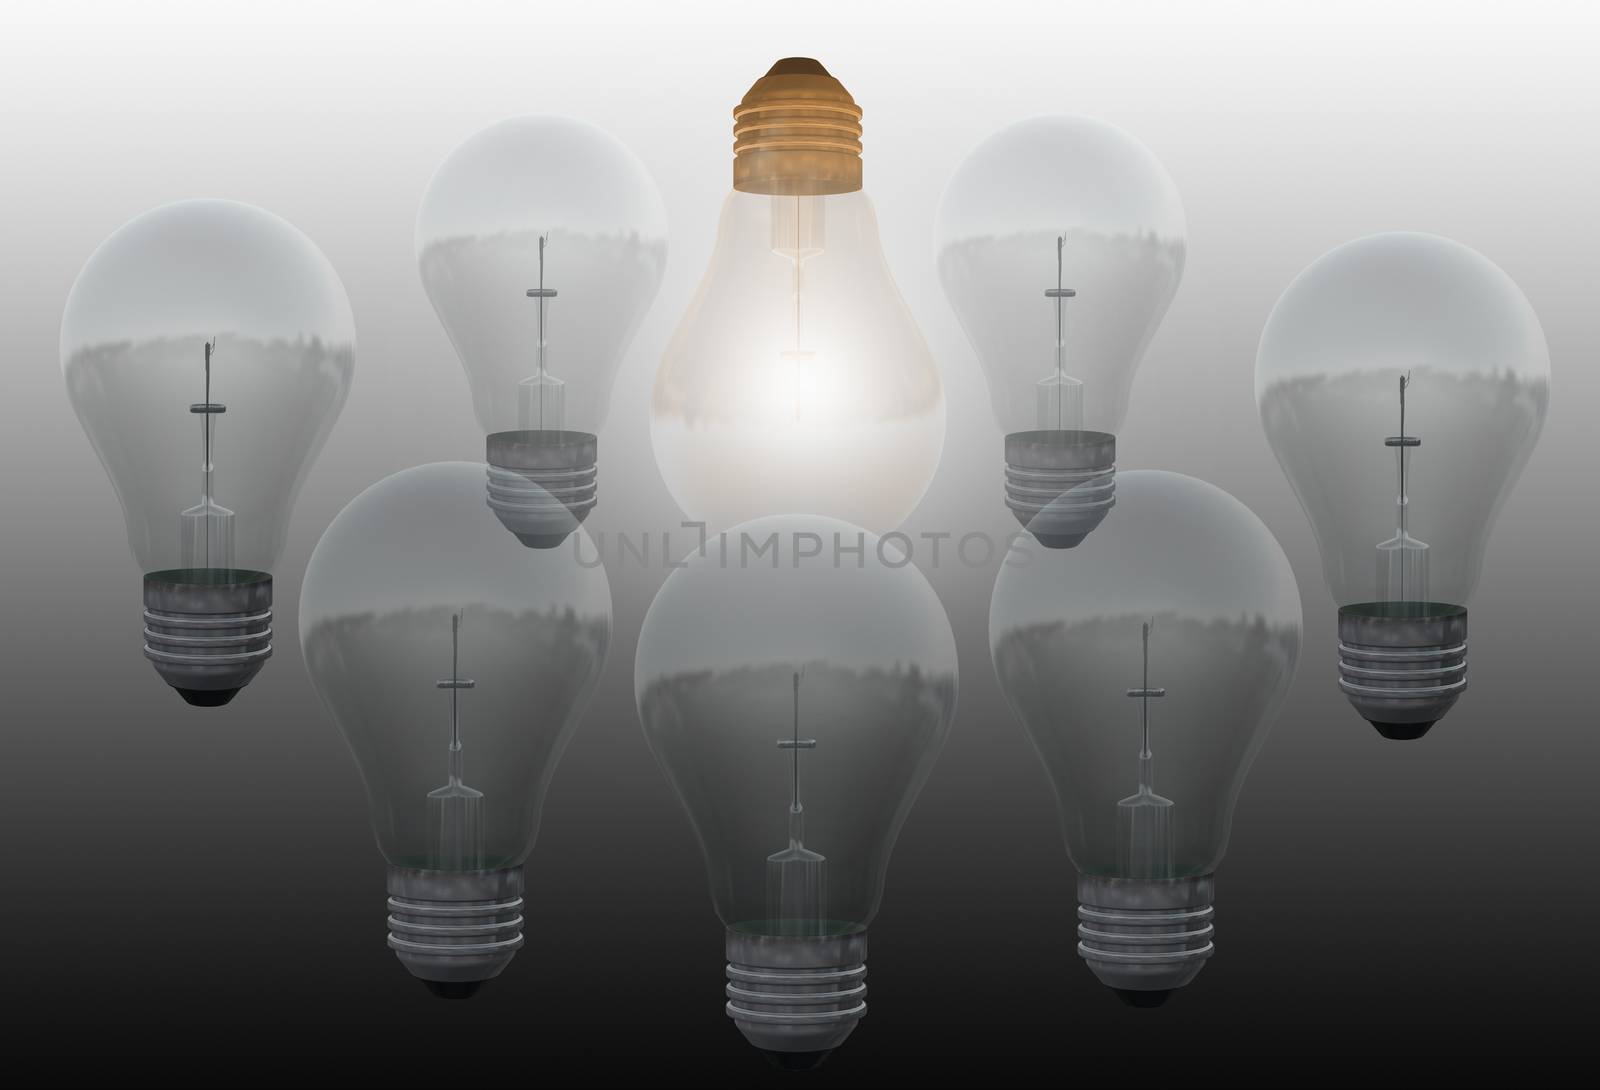 One glowing bulb which illustrates "standing out from the others"